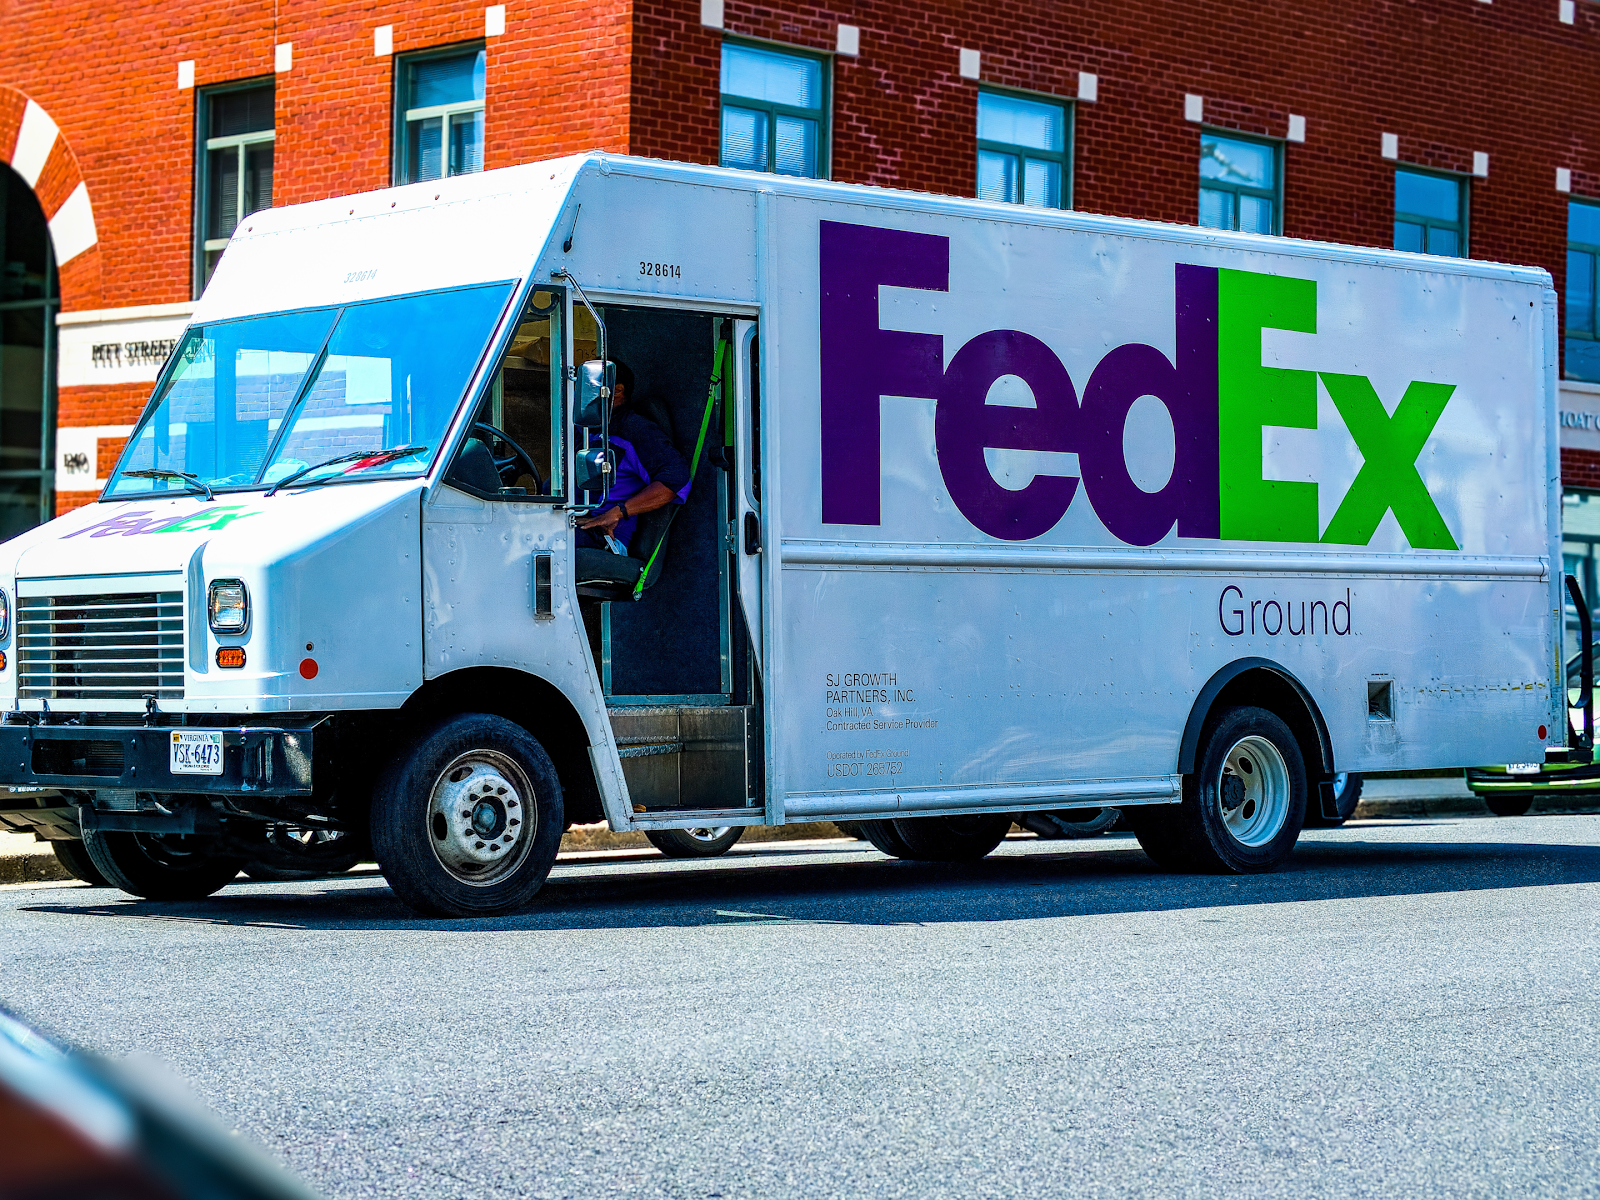 fedex delivery truck on the road driving and making deliveries